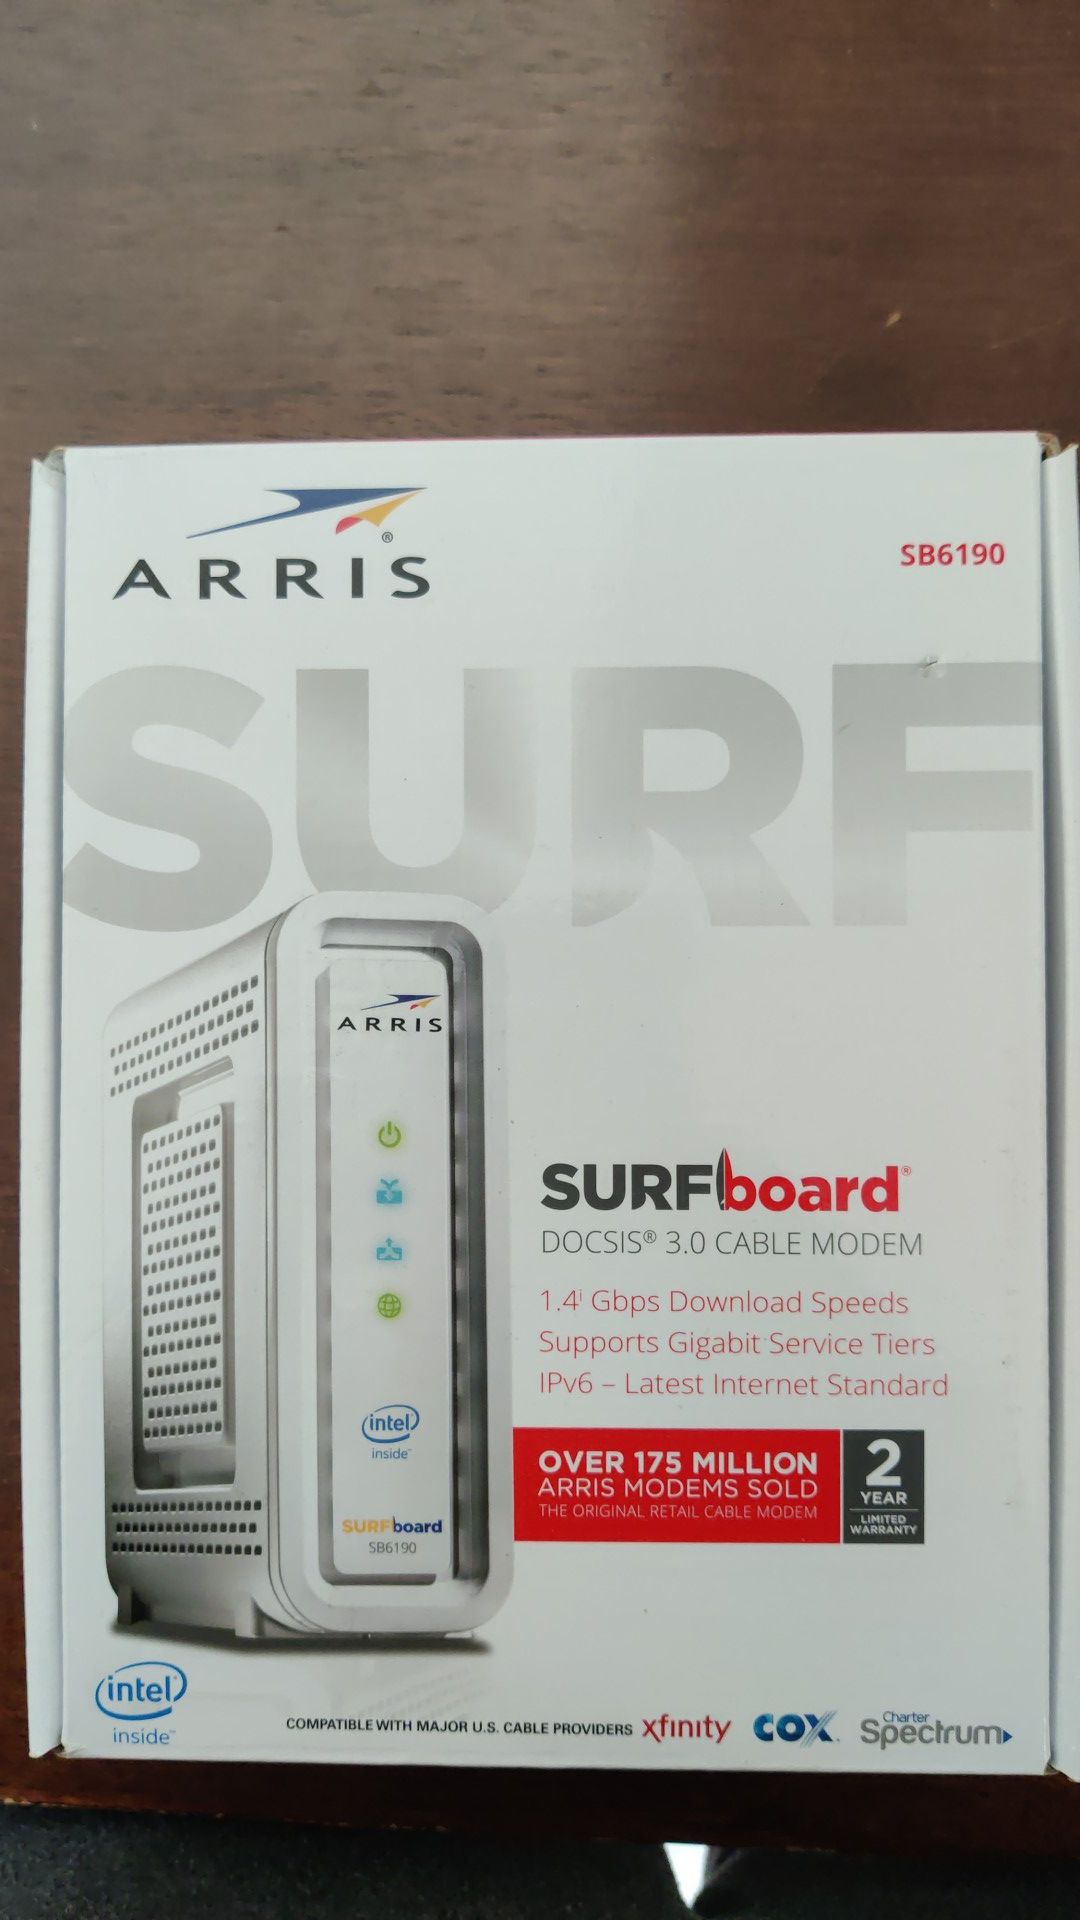 Arris Surfboard SB6190 modem and Asus AC1900 RT-AC1900P router